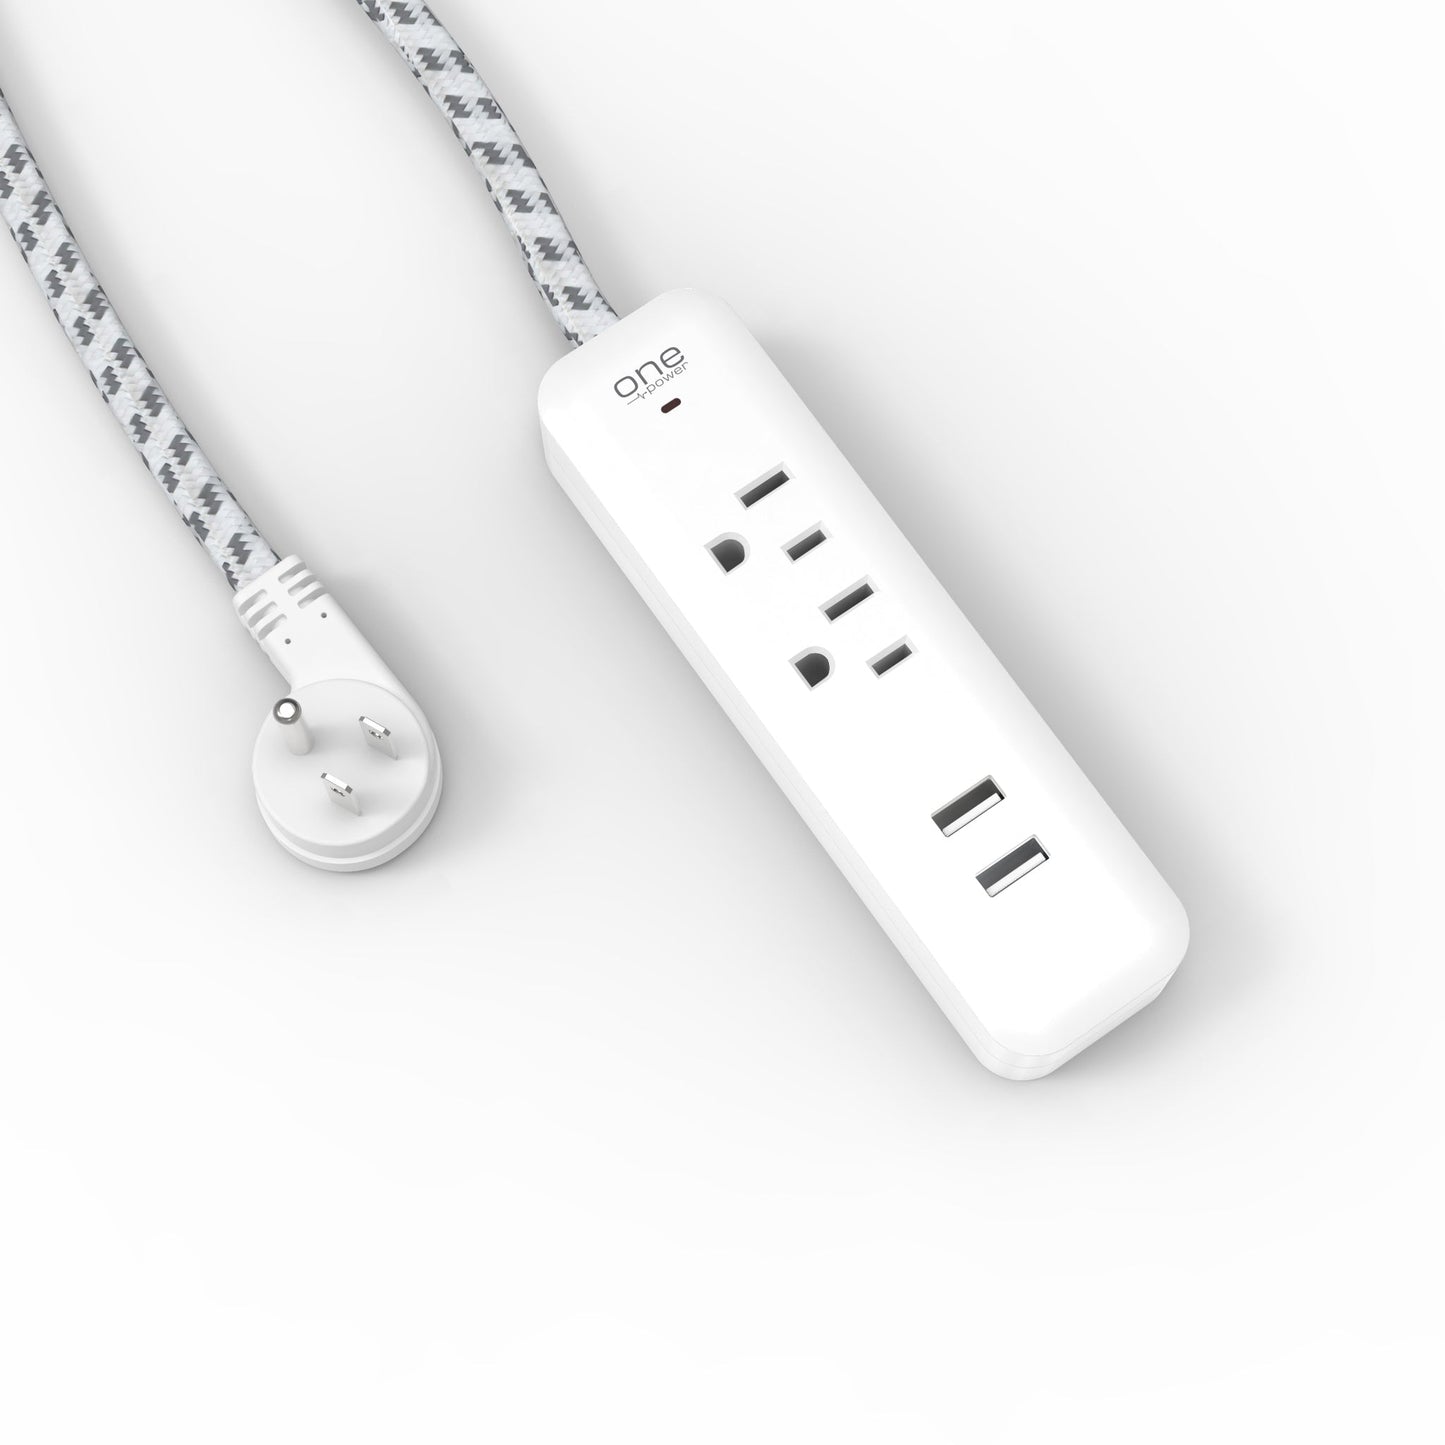 2 Outlet, 2 USB-A Surge Protector Power Strip with Braided Cable -300 Joules Protection- (OPSS221) freeshipping - One Products